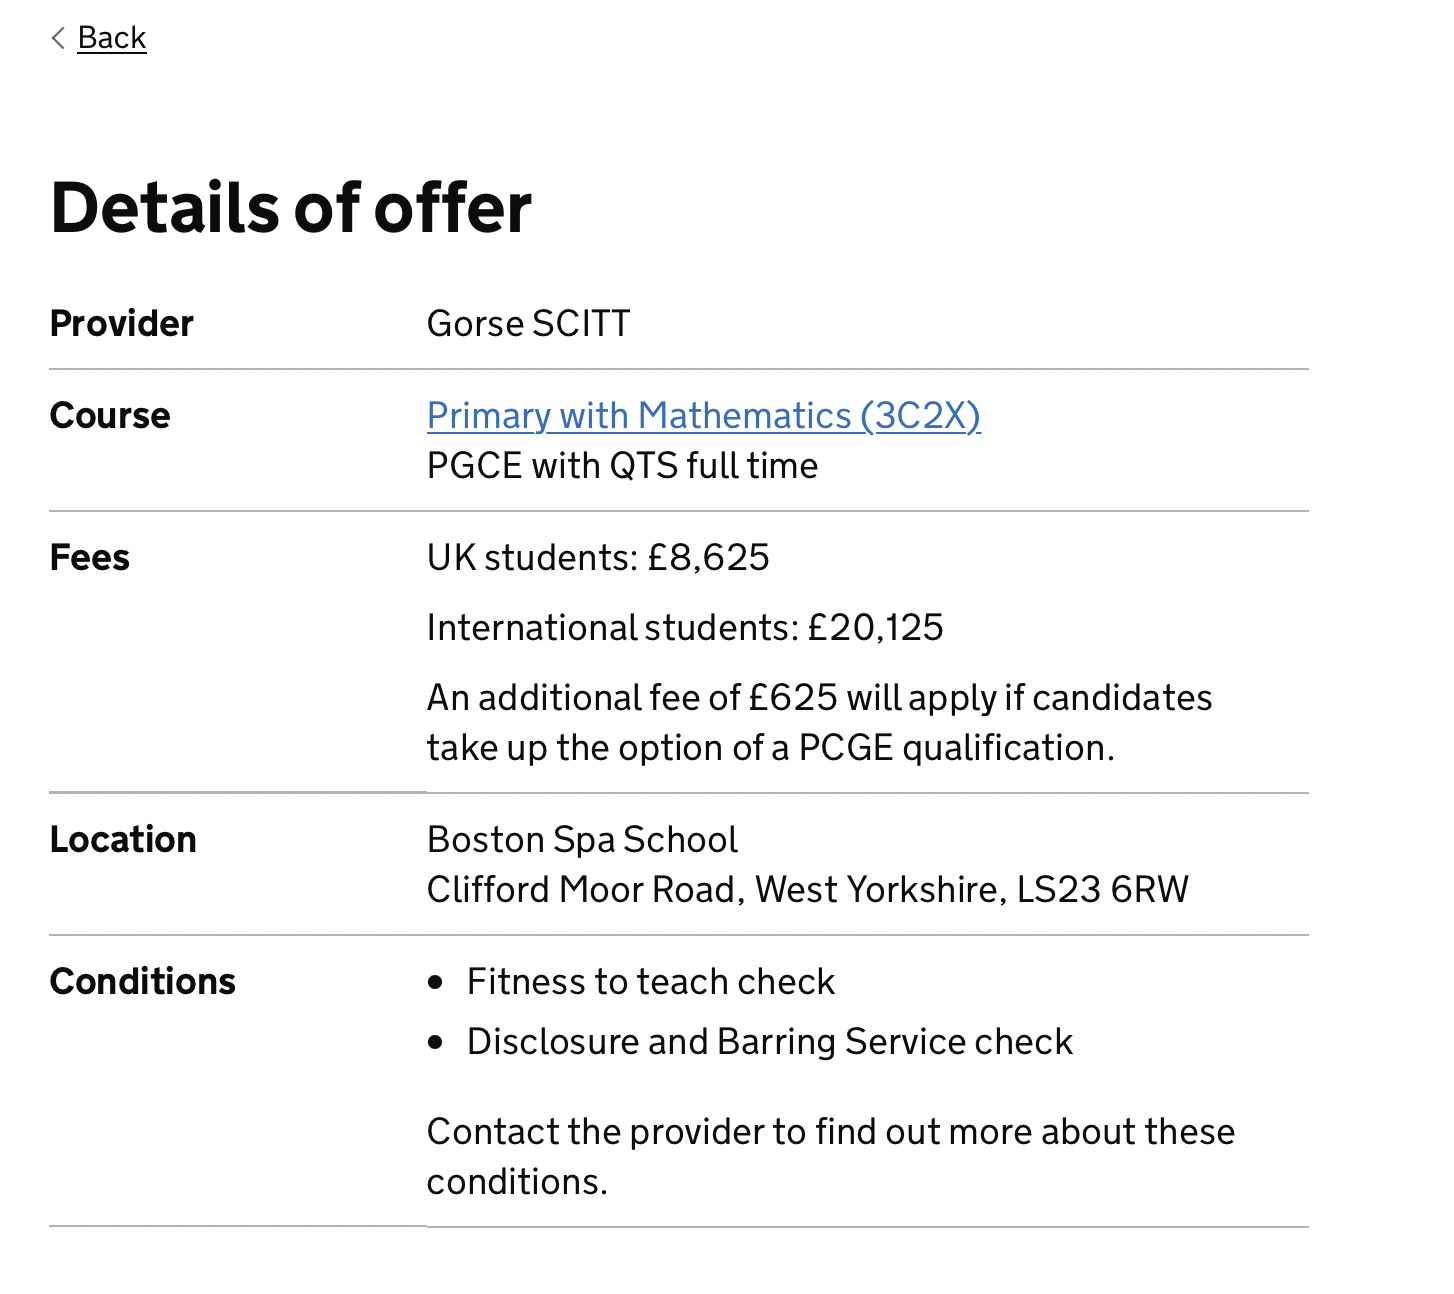 Screenshot showing a ‘Details of offer’ heading, under which the fees for UK and international students are given. It also says that “an additional fee of £625 will apply if candidates take up the option of a PGCE qualification.”